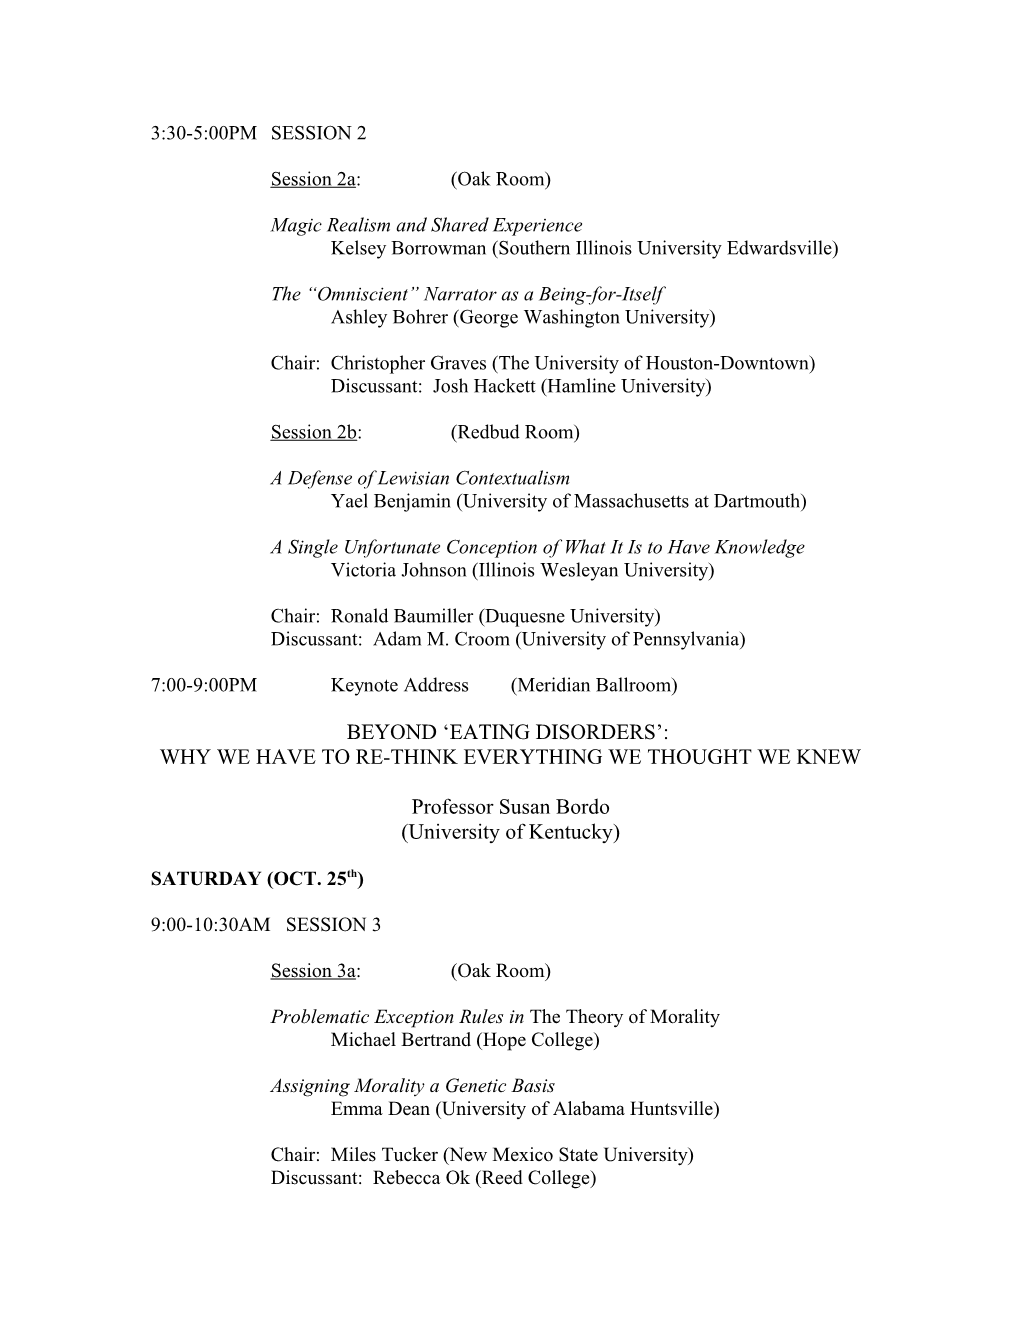 Second Annual SIUE Undergraduate Philosophy Conference Schedule